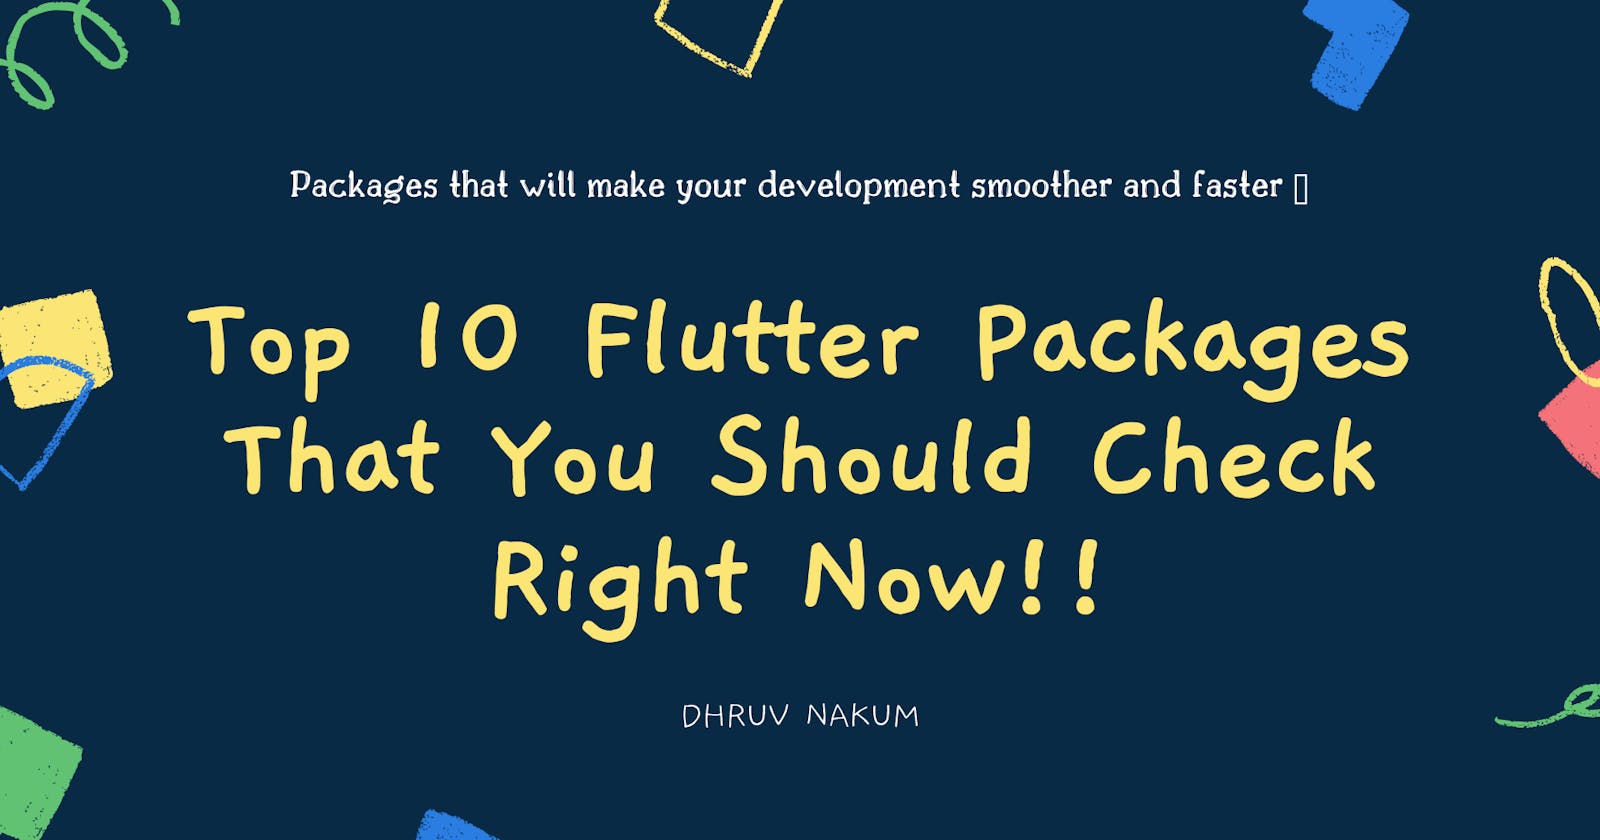 Top 10 Flutter Packages That You Should Check Right Now!!